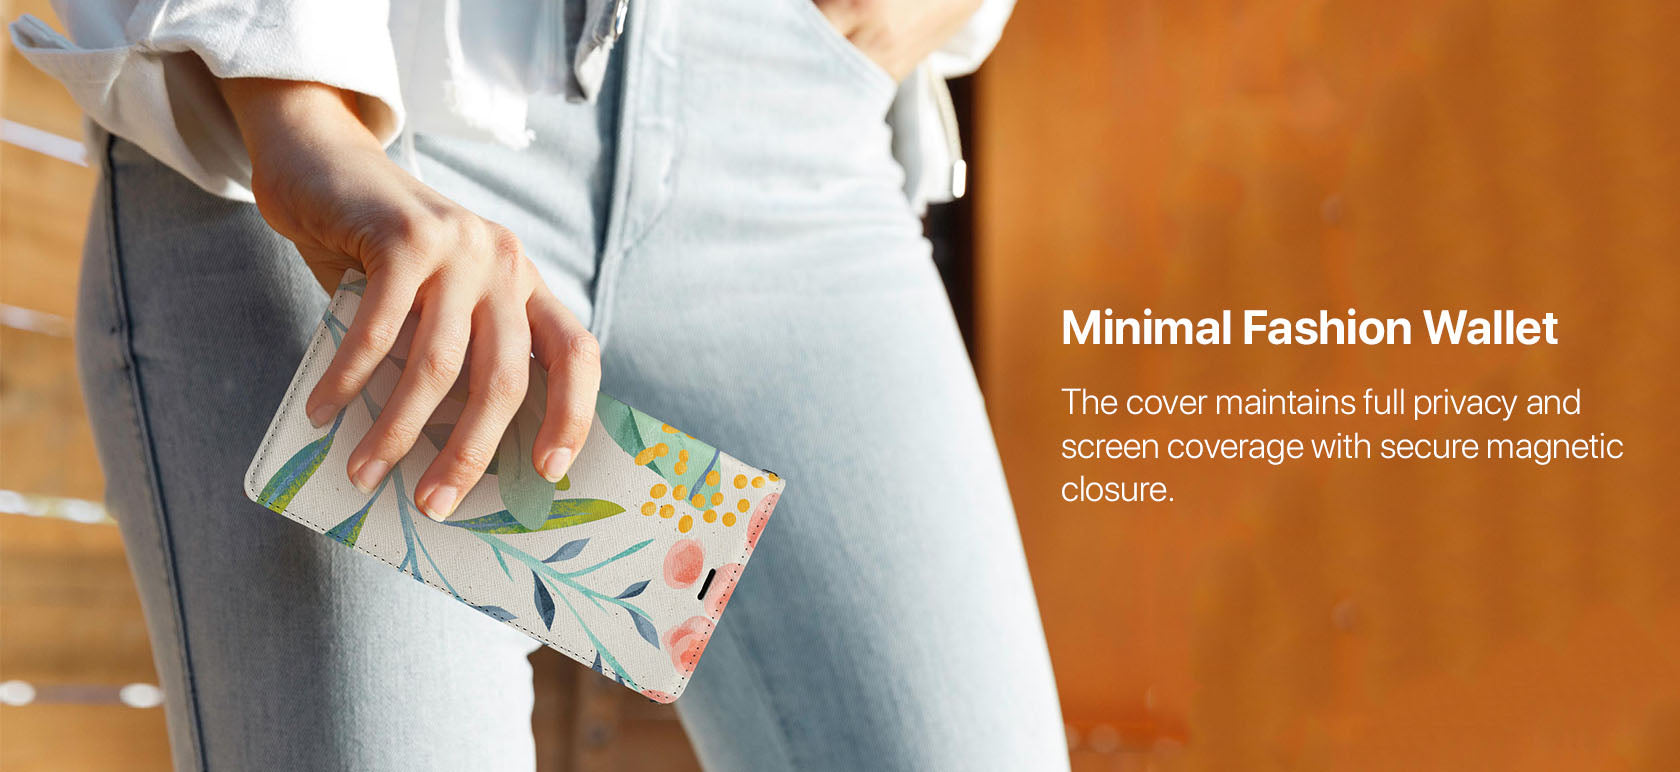 The cover maintains full privacy and screen coverage with secure magnetic closure.